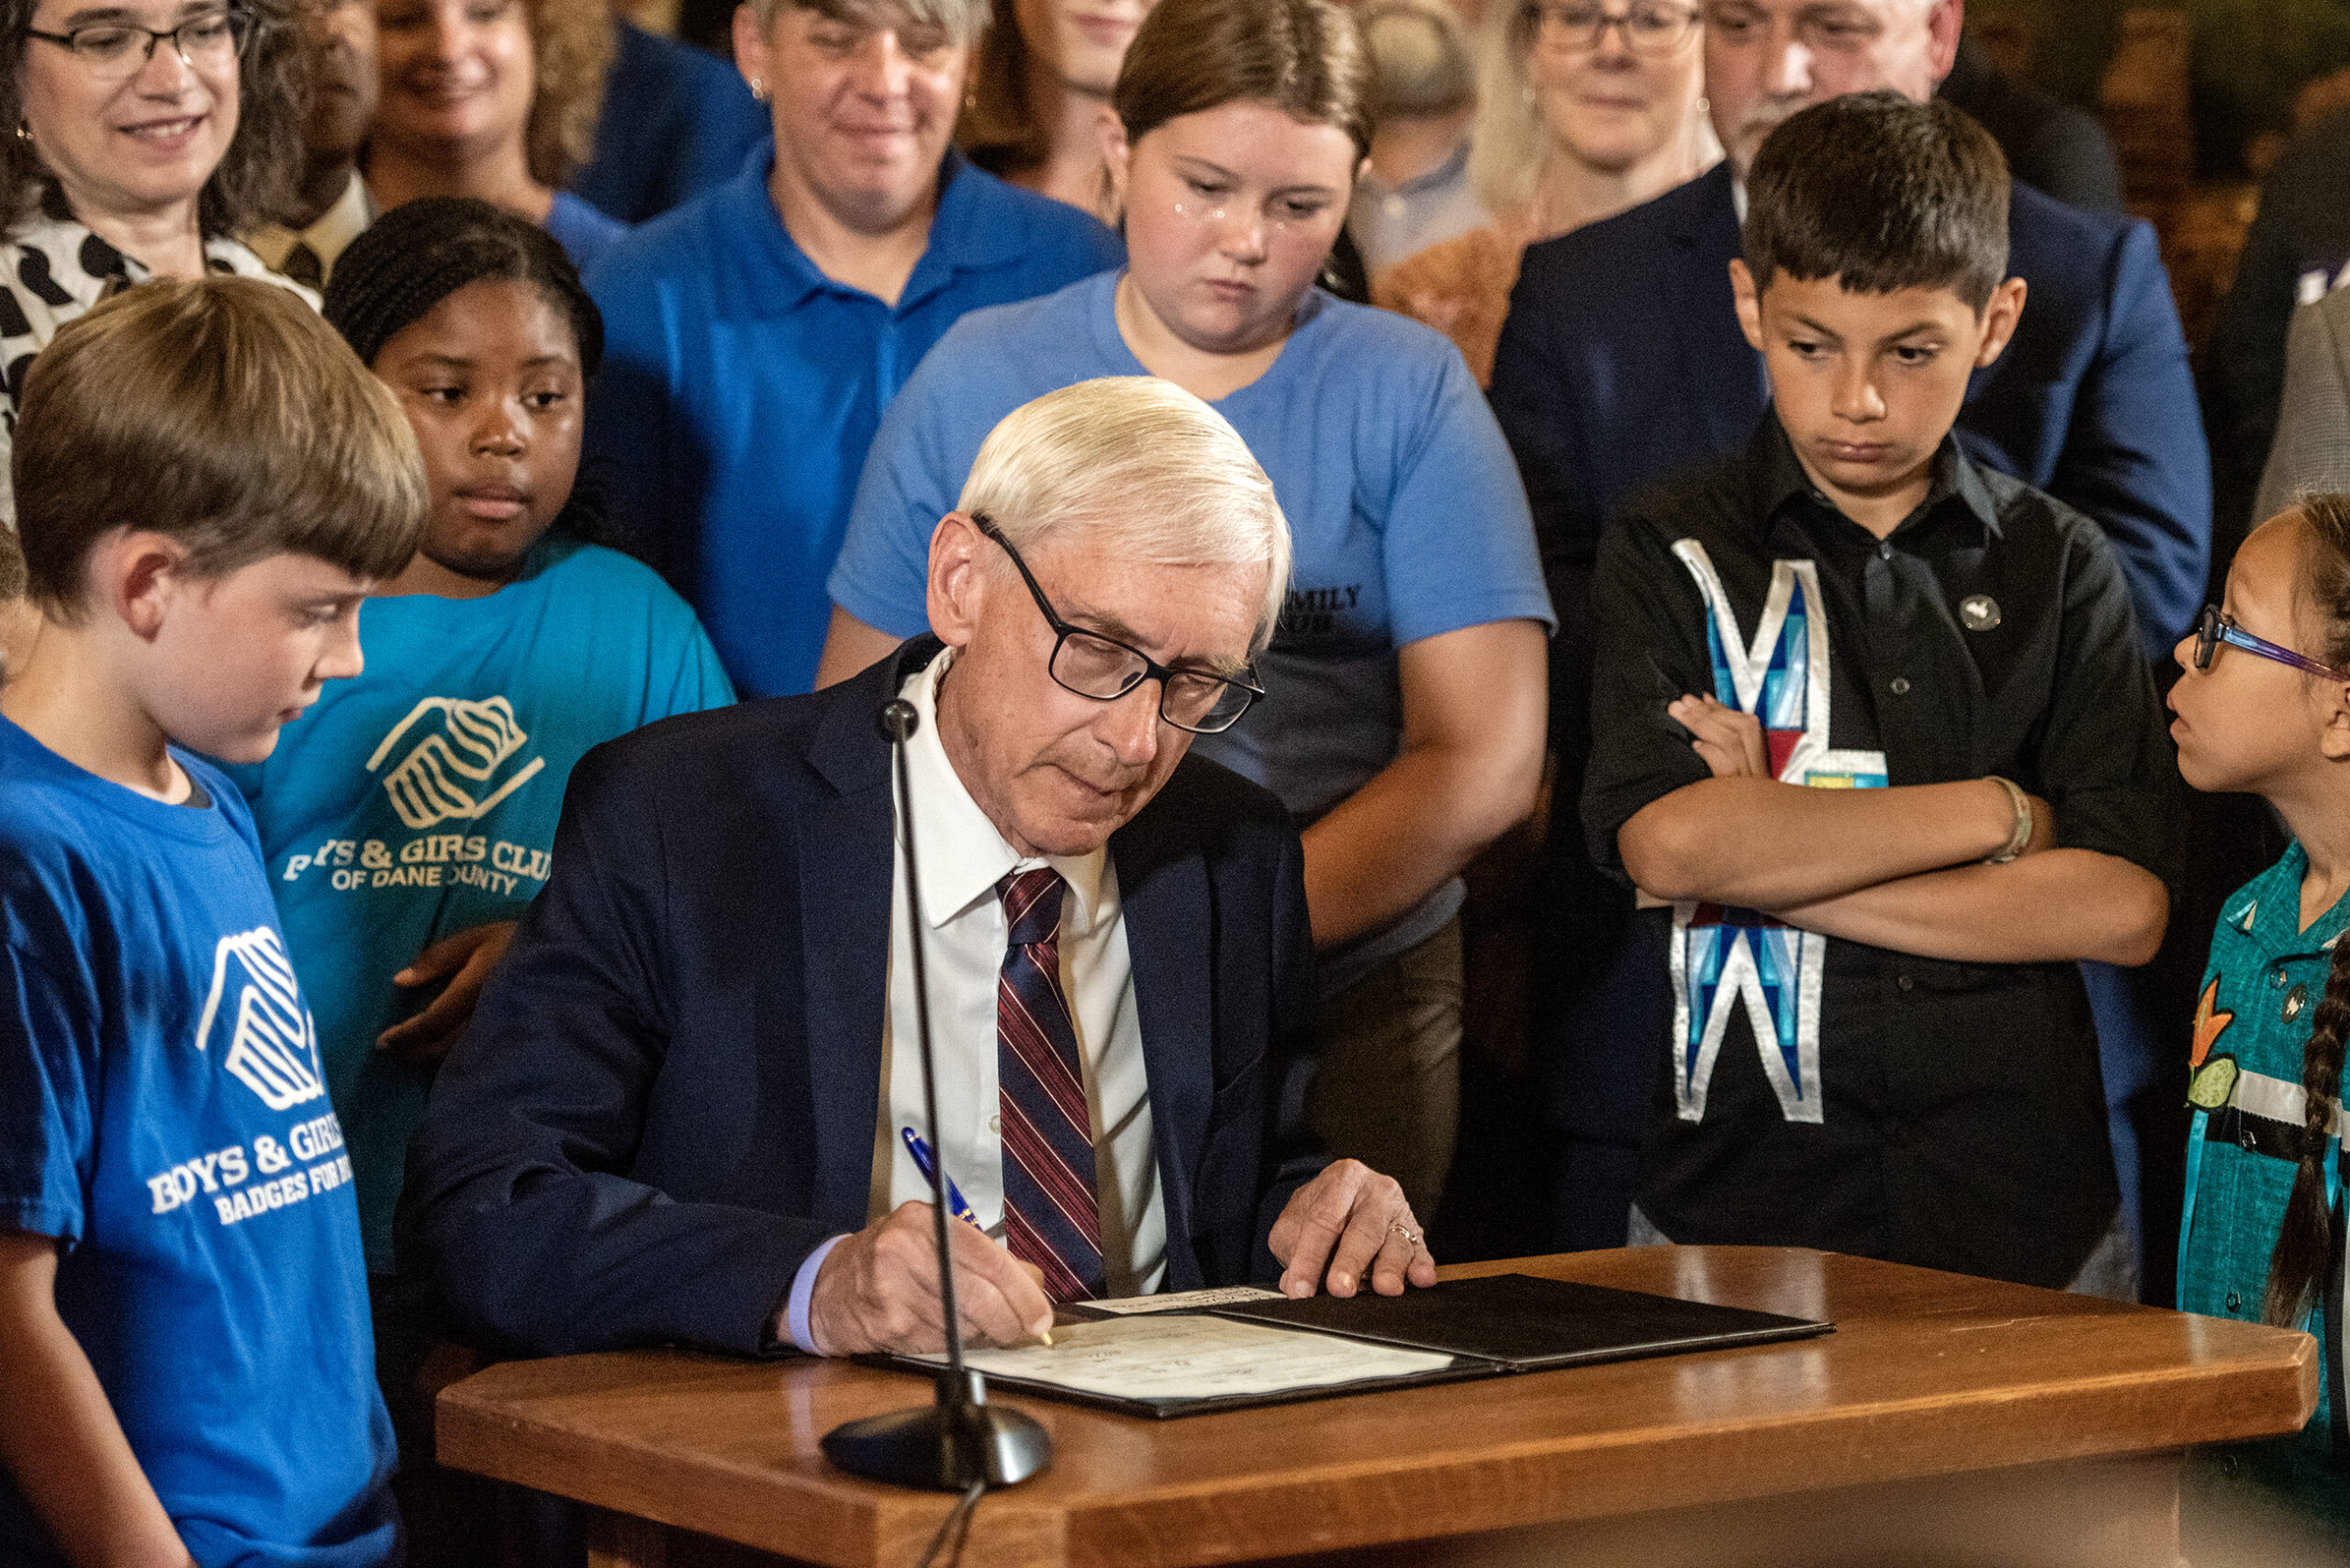 Gov. Tony Evers leans over a piece of paper as he signs it. Children attending the event watch over his shoulder.